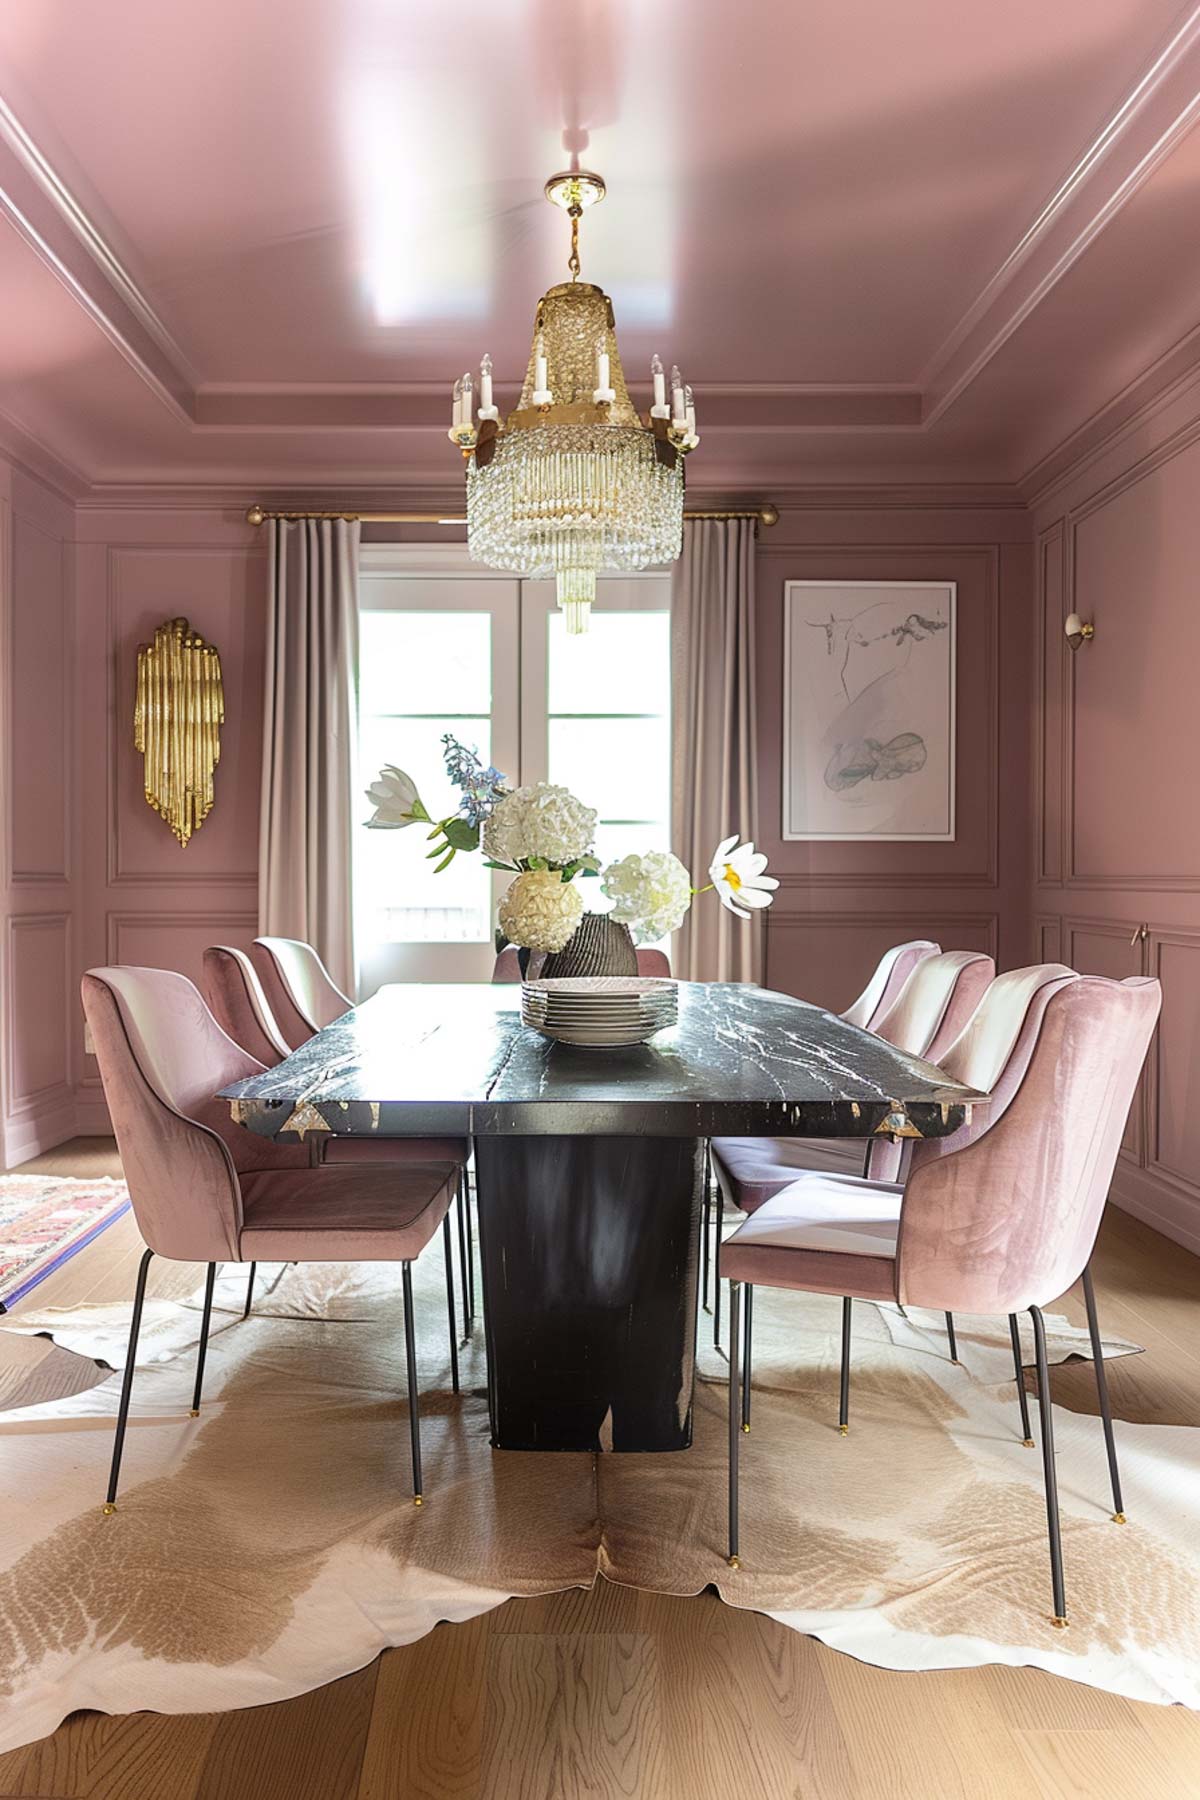 Color drenched pink muave dining room with abstract art and fresh flowers.